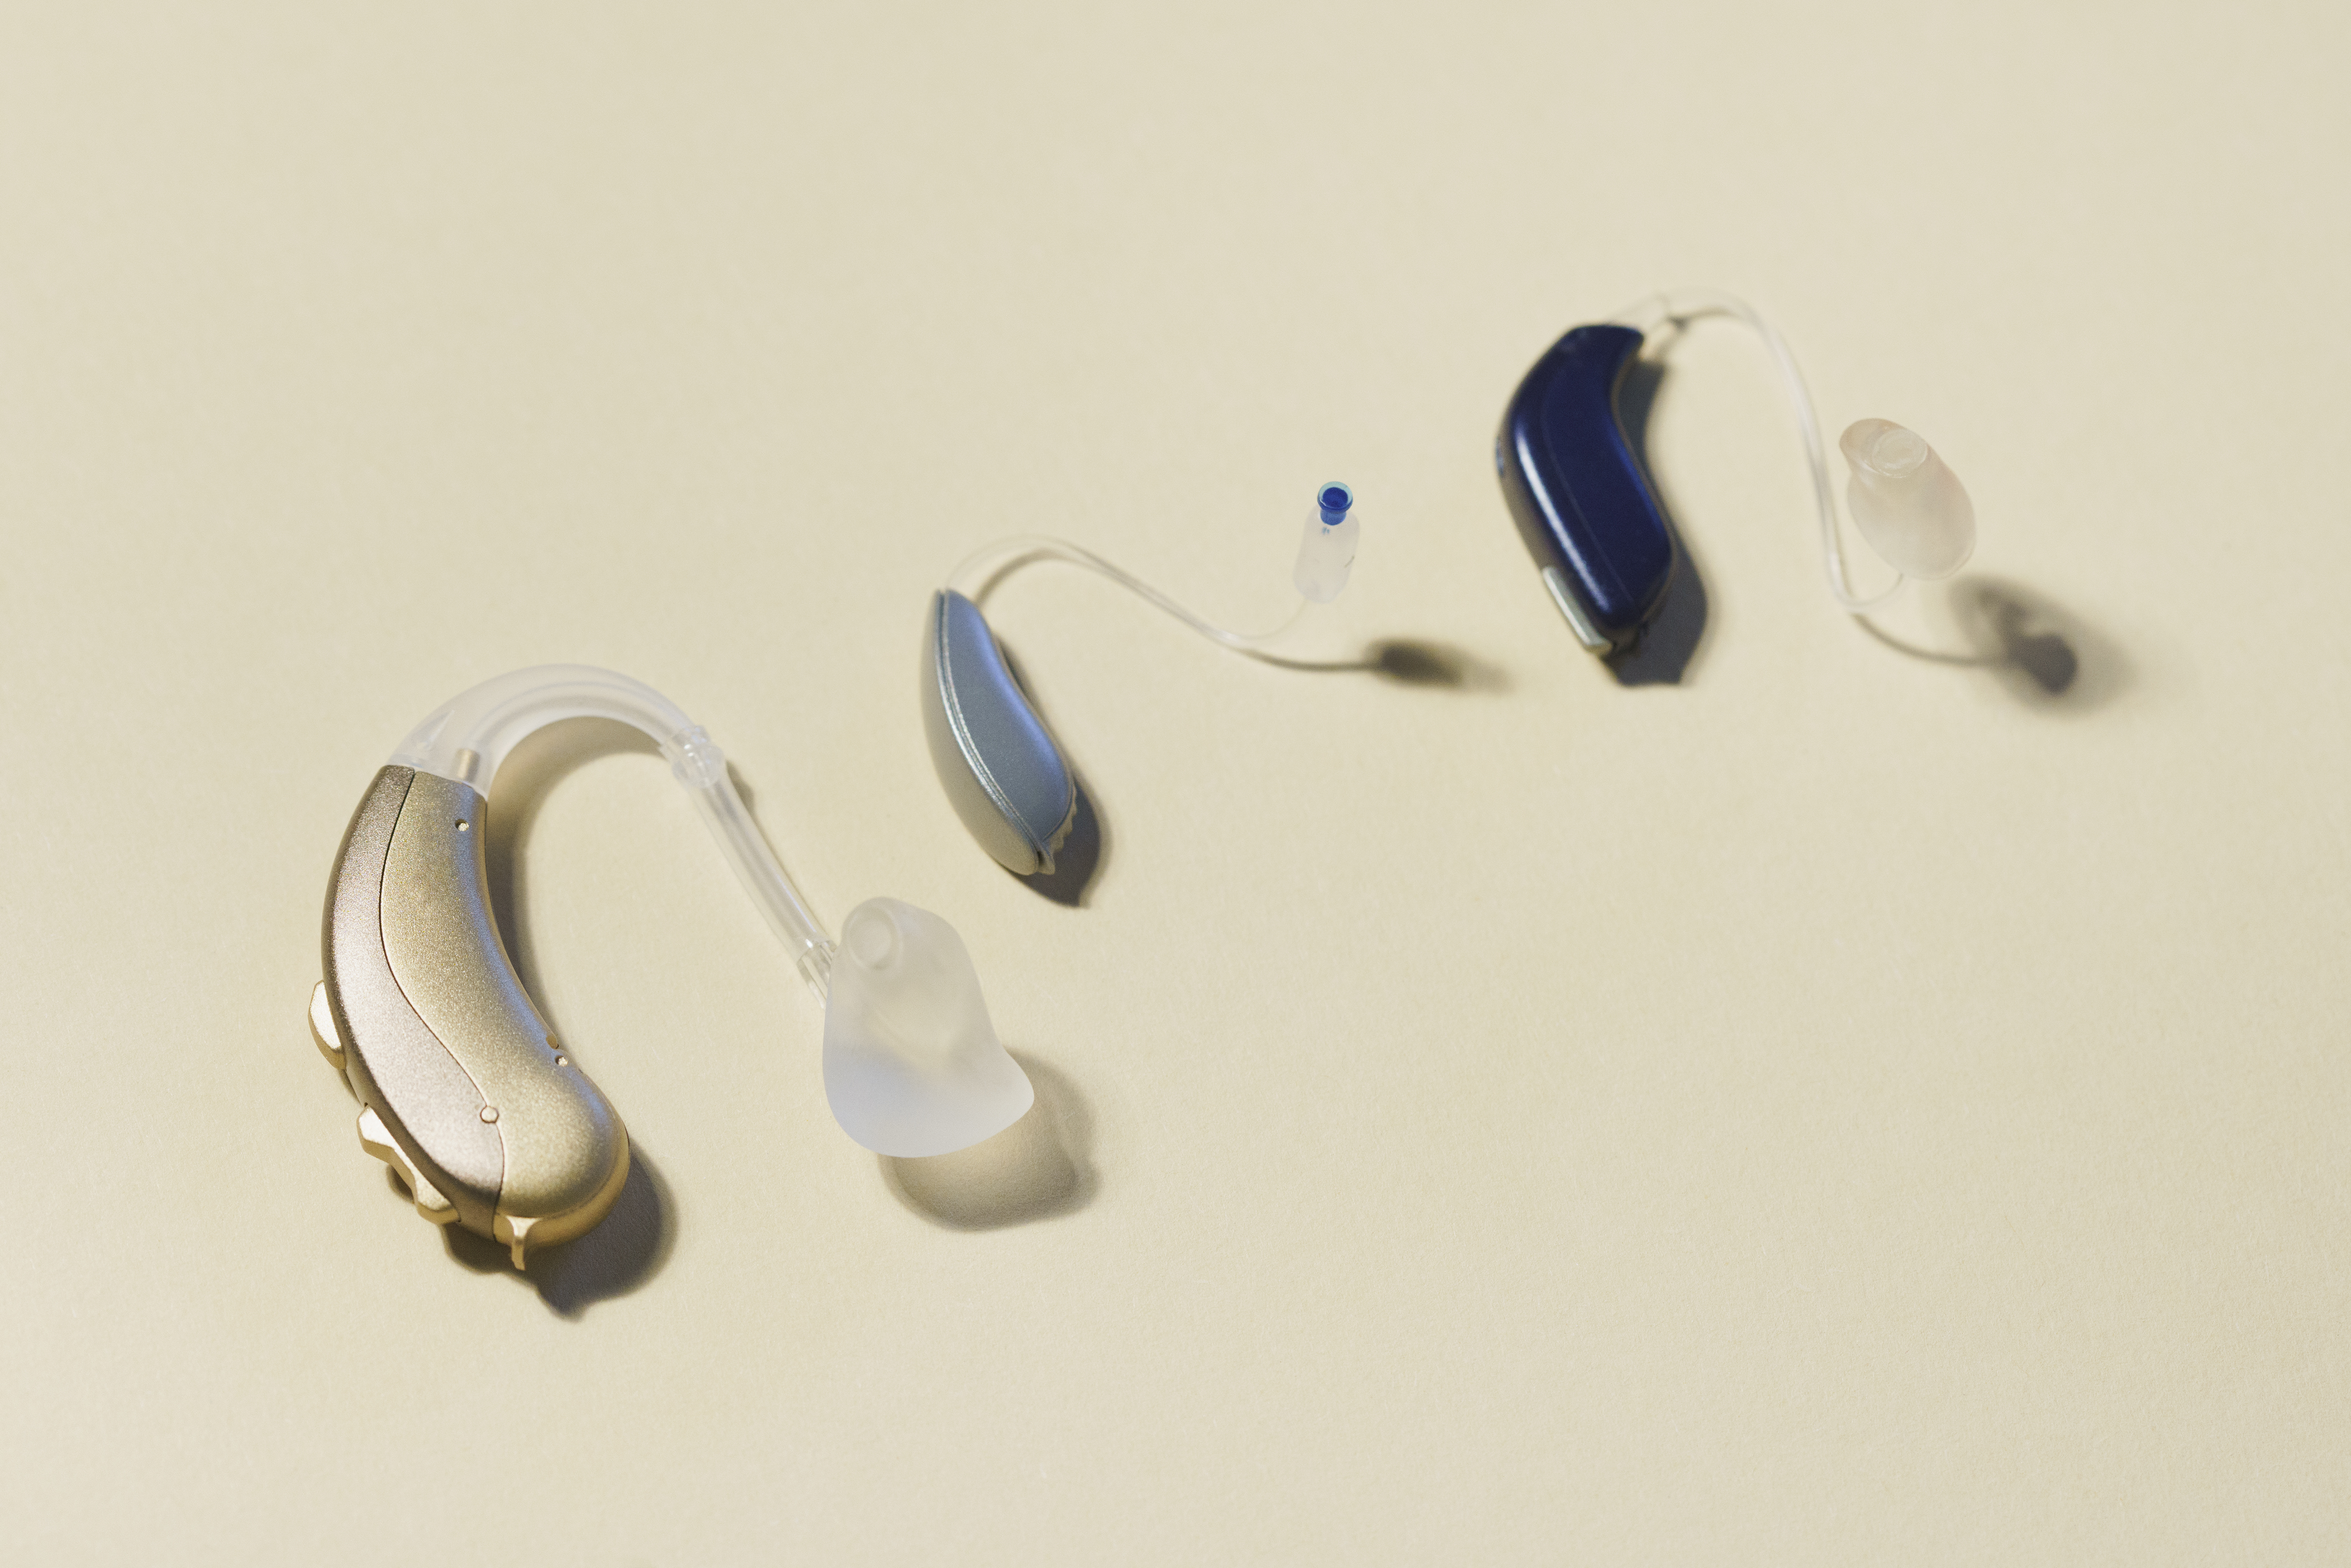 Three types of hearing aids